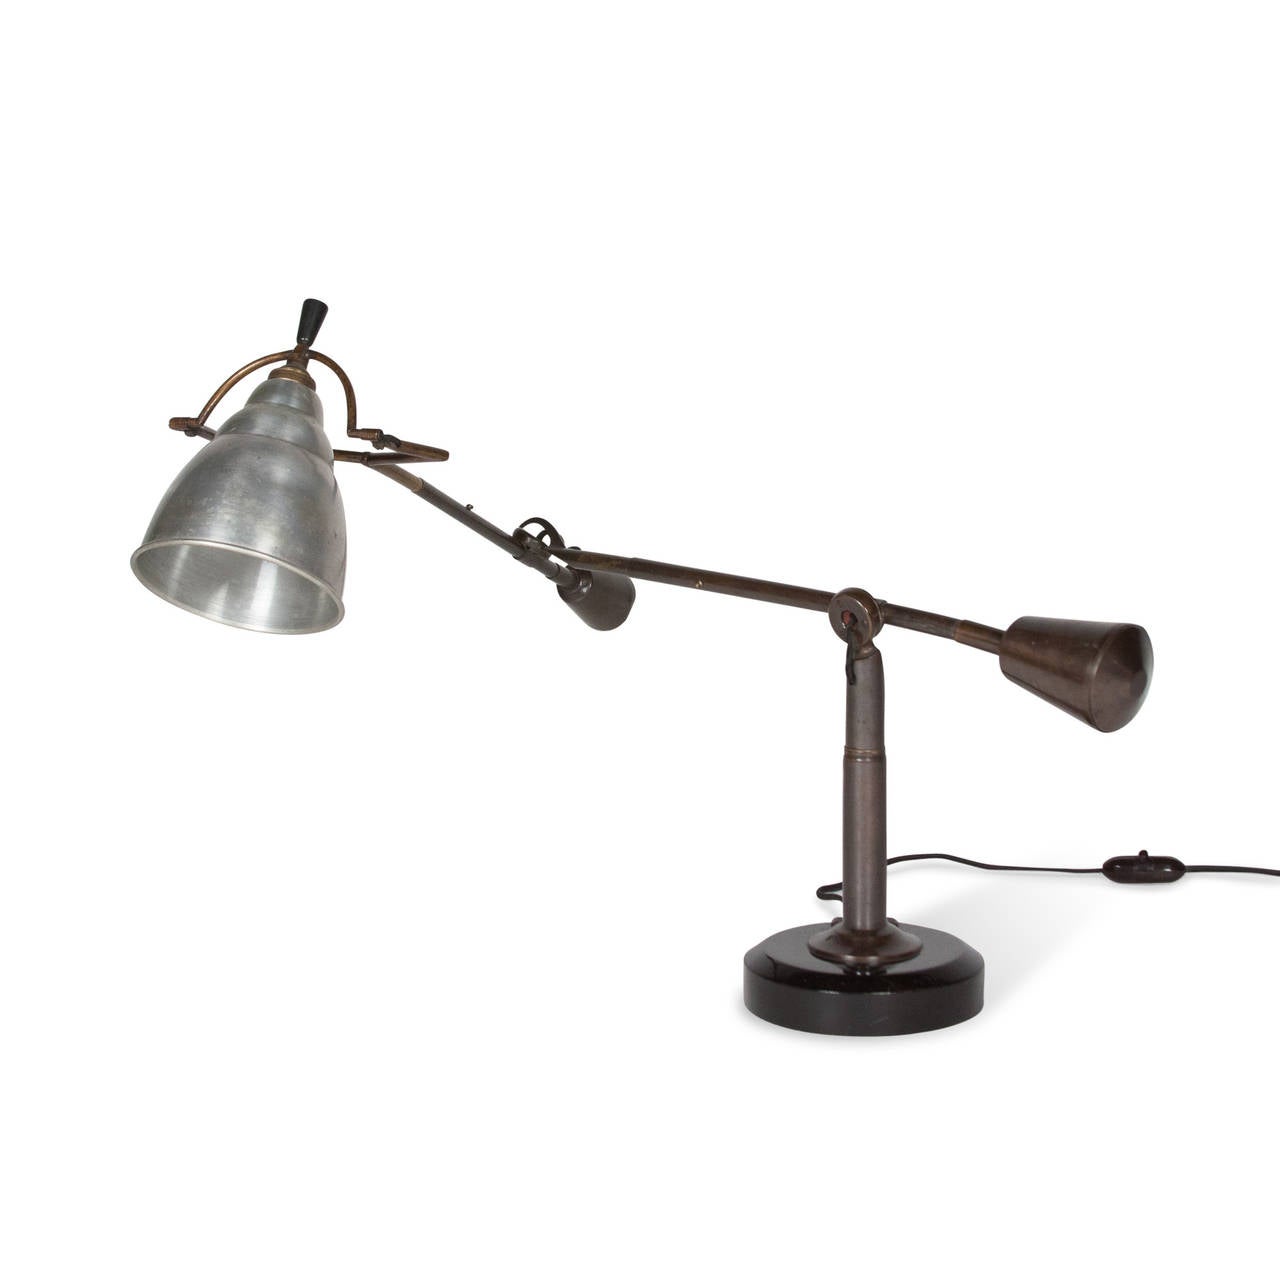 Early 20th Century Articulated Counterweight Desk Lamp by Edouard Wilfred Buquet, French 1928